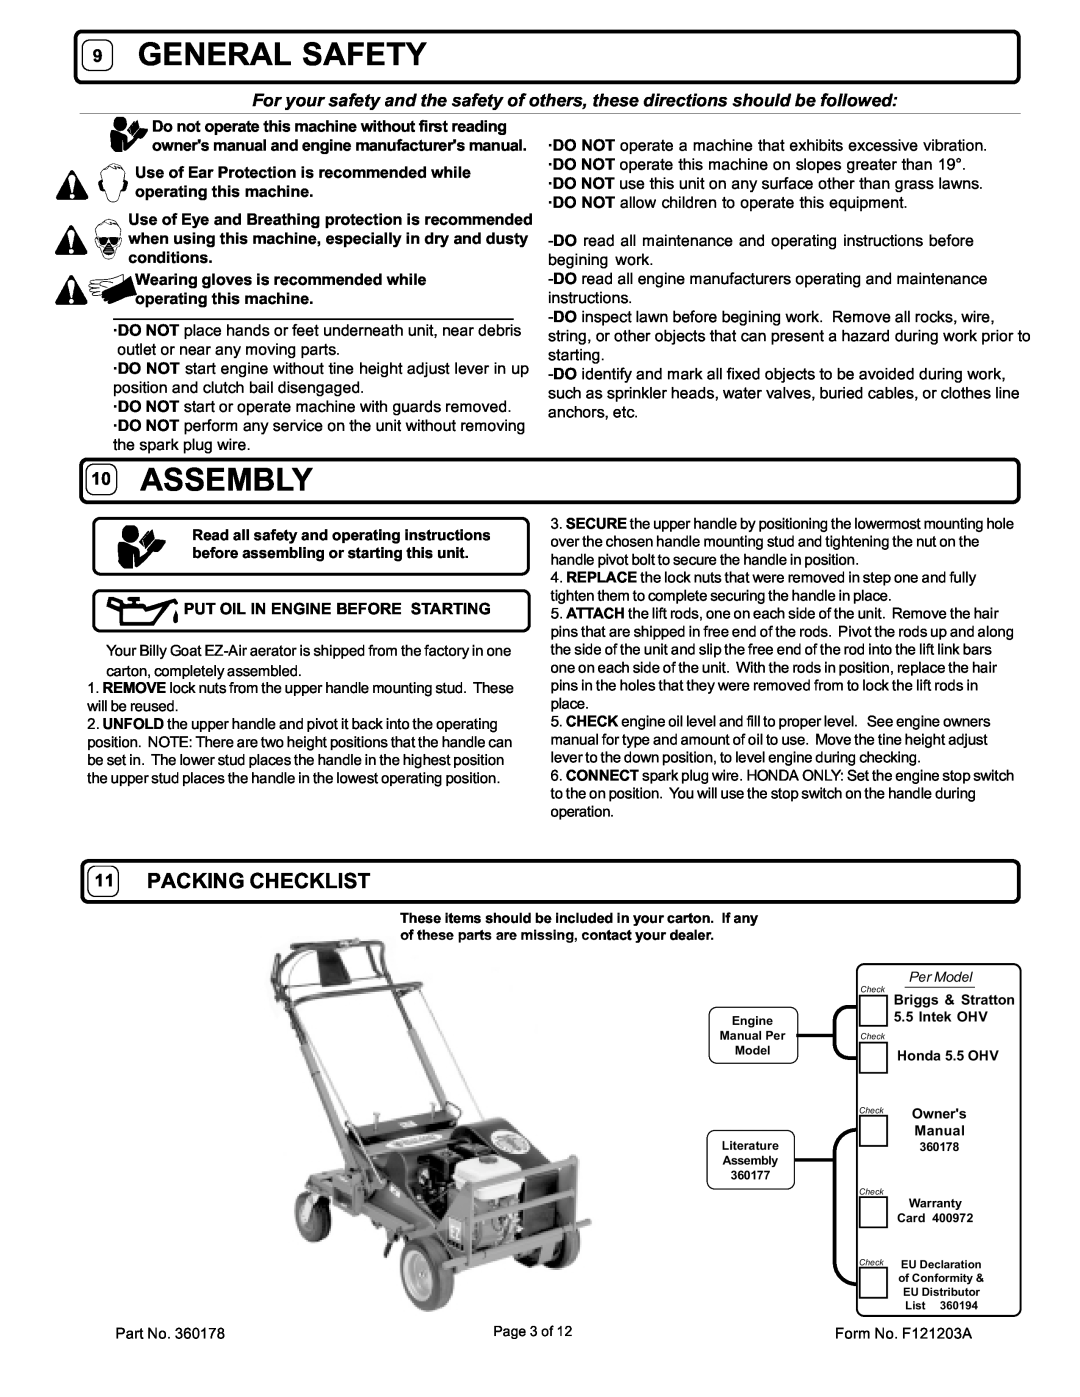 Billy Goat AE551, AE551H owner manual General Safety, Assembly, Packing Checklist 